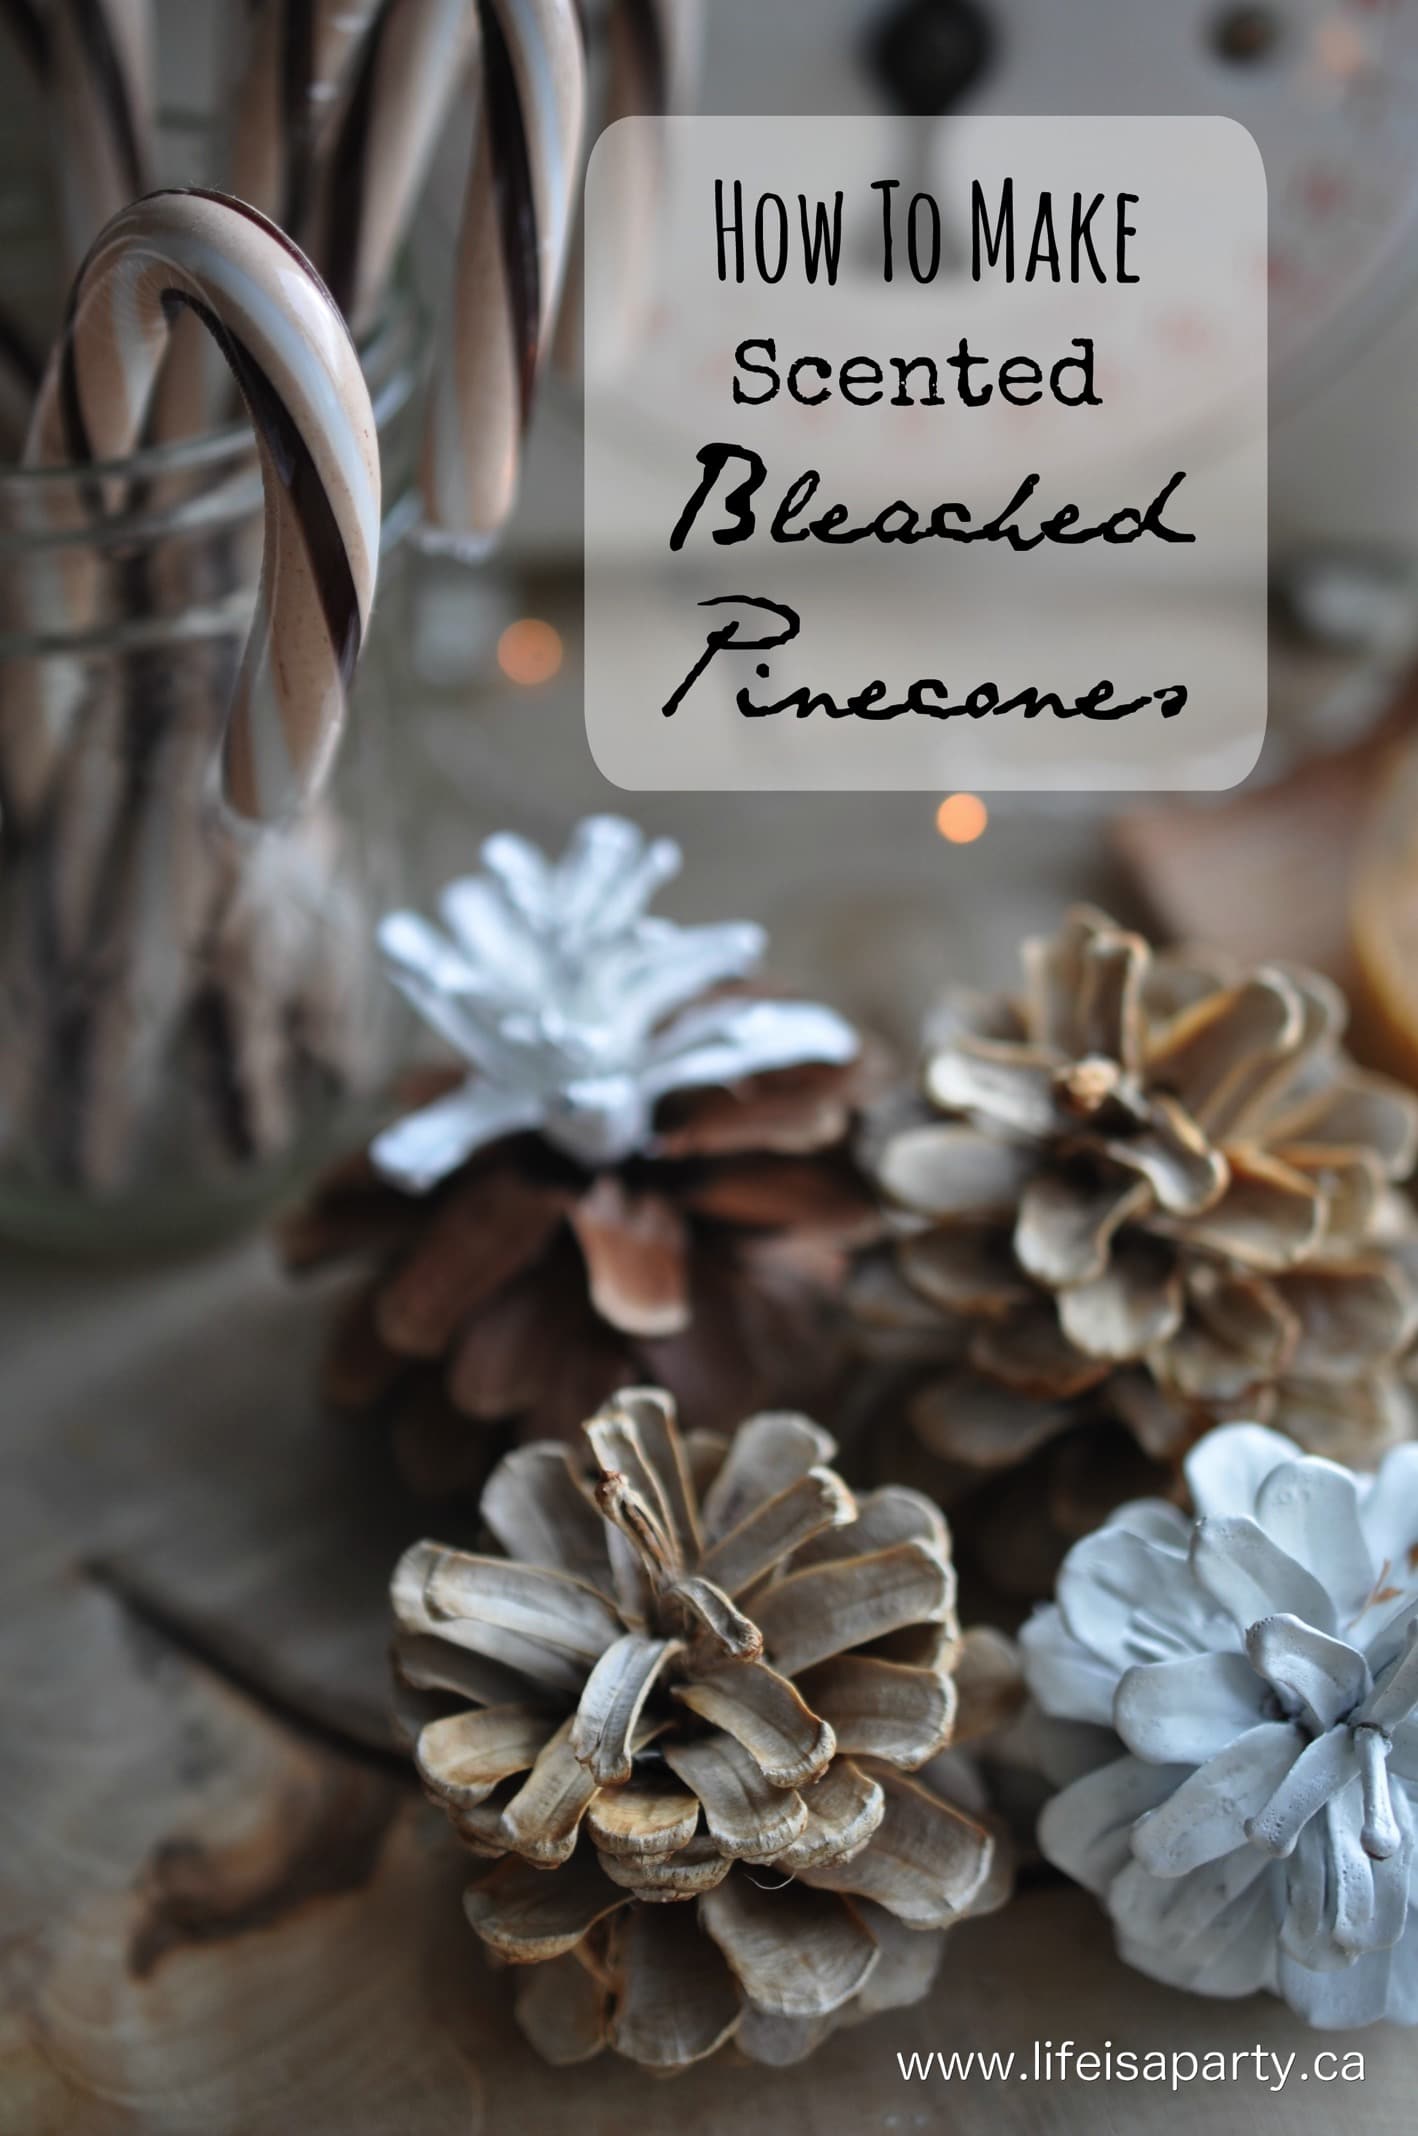 Scented Bleached Pinecones